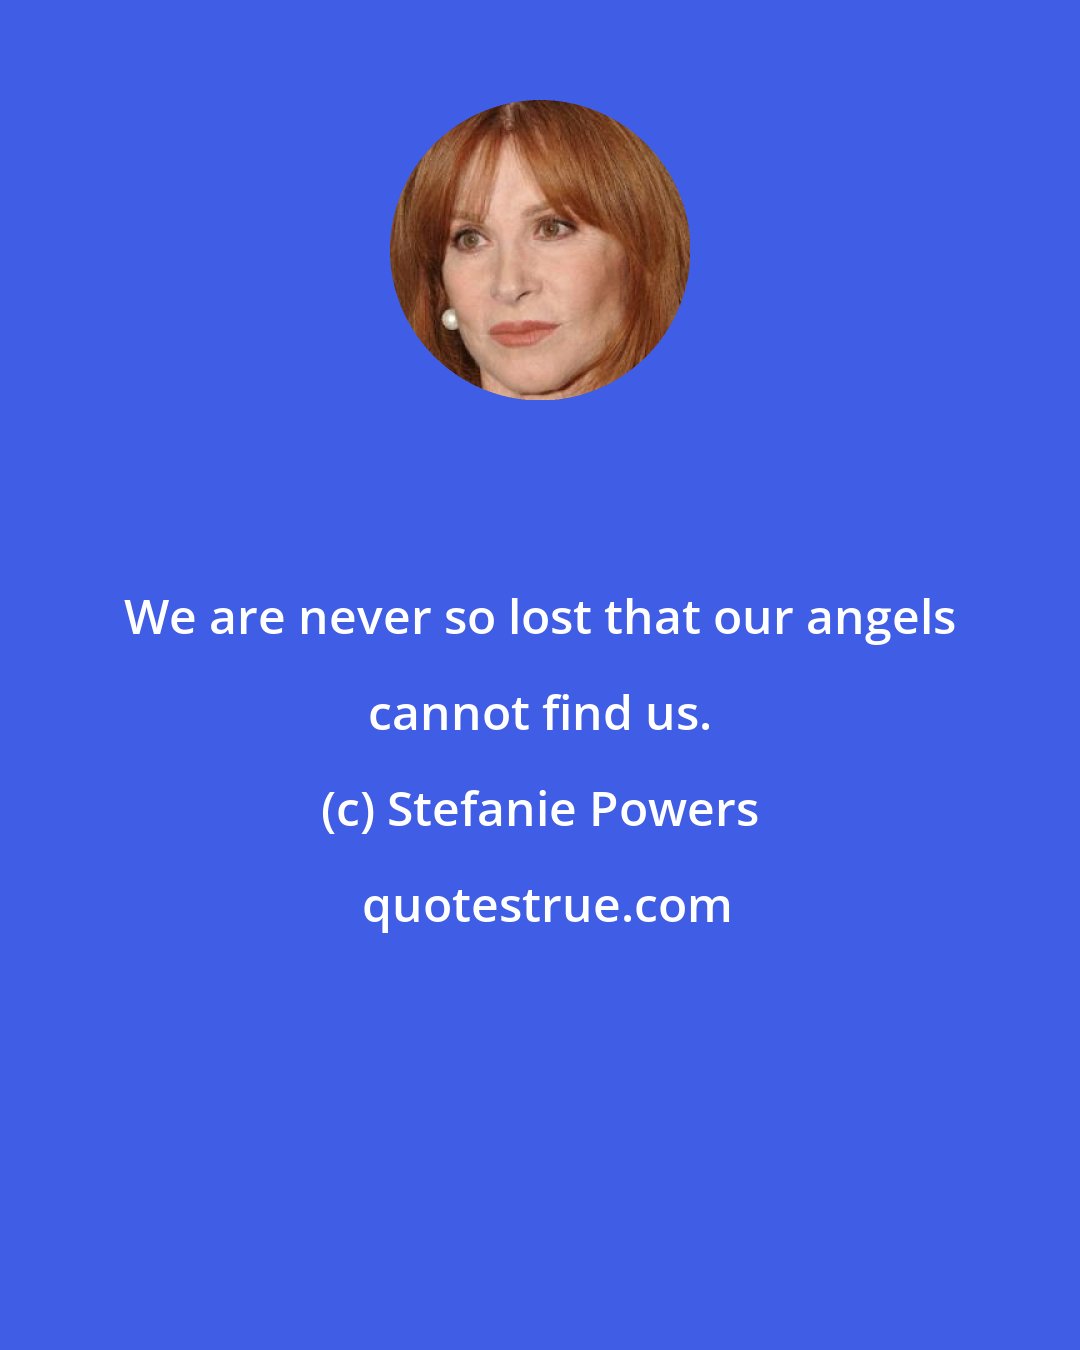 Stefanie Powers: We are never so lost that our angels cannot find us.